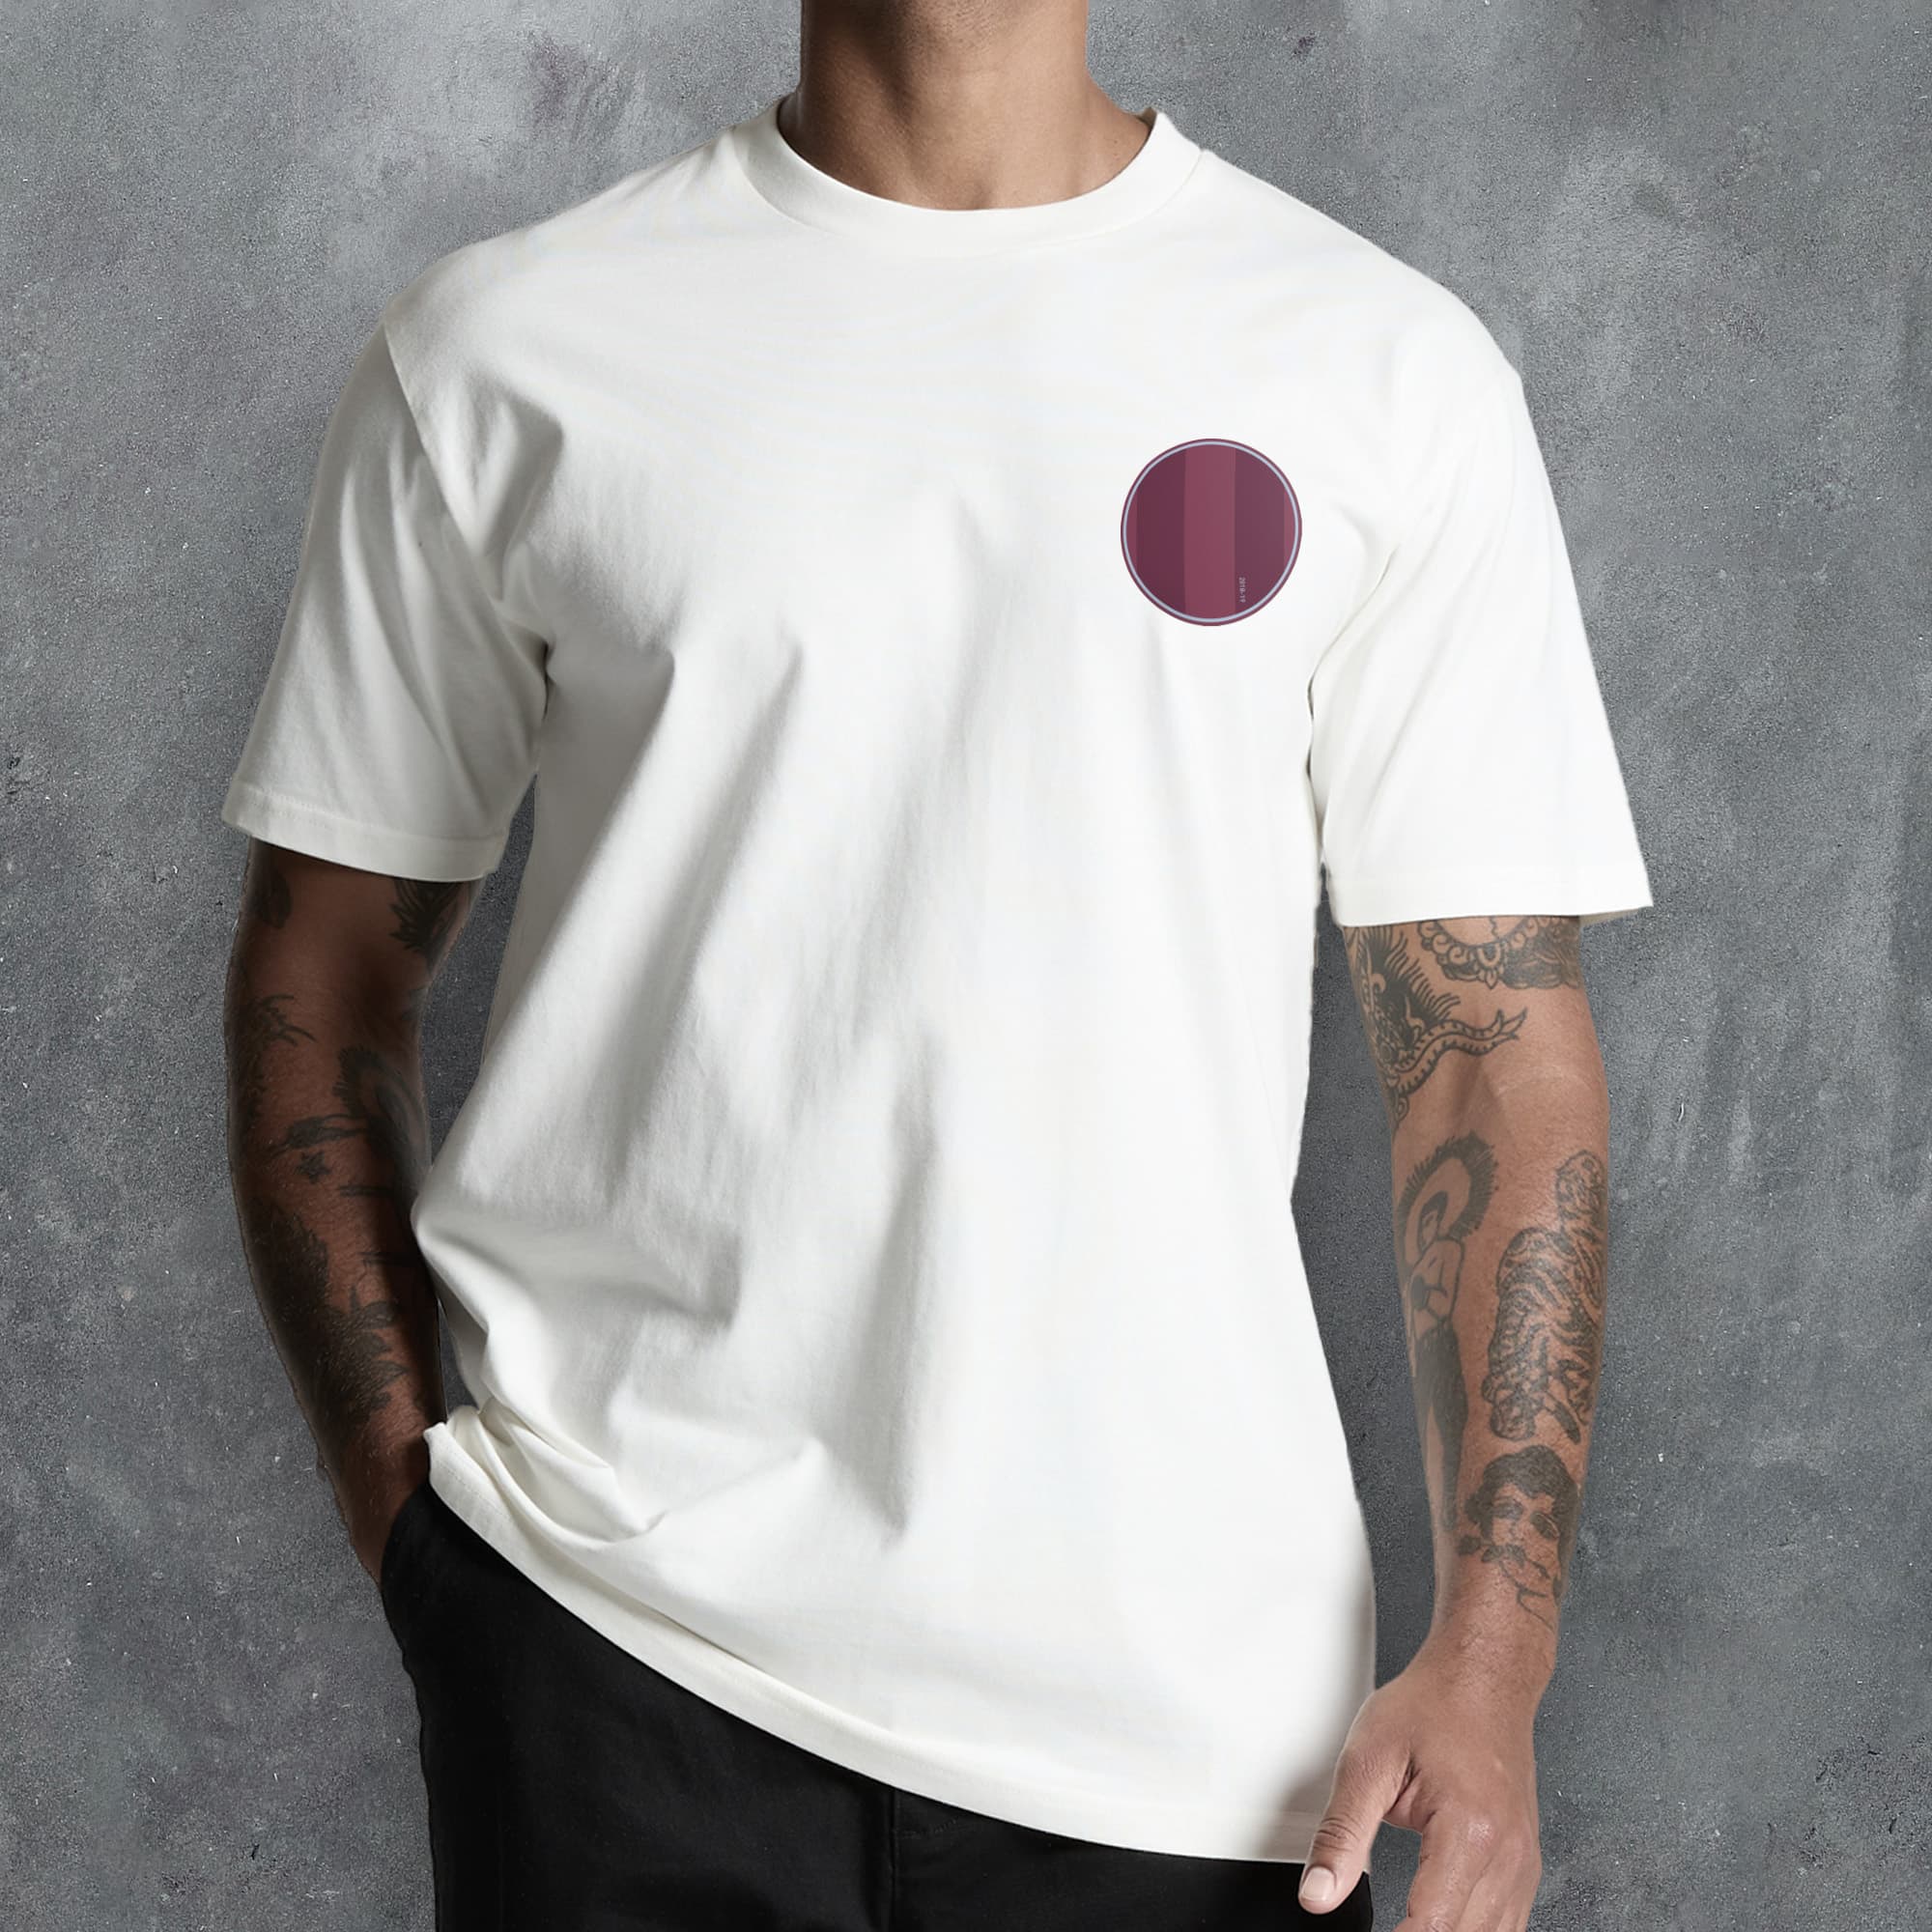 a man wearing a white t - shirt with a purple circle on it